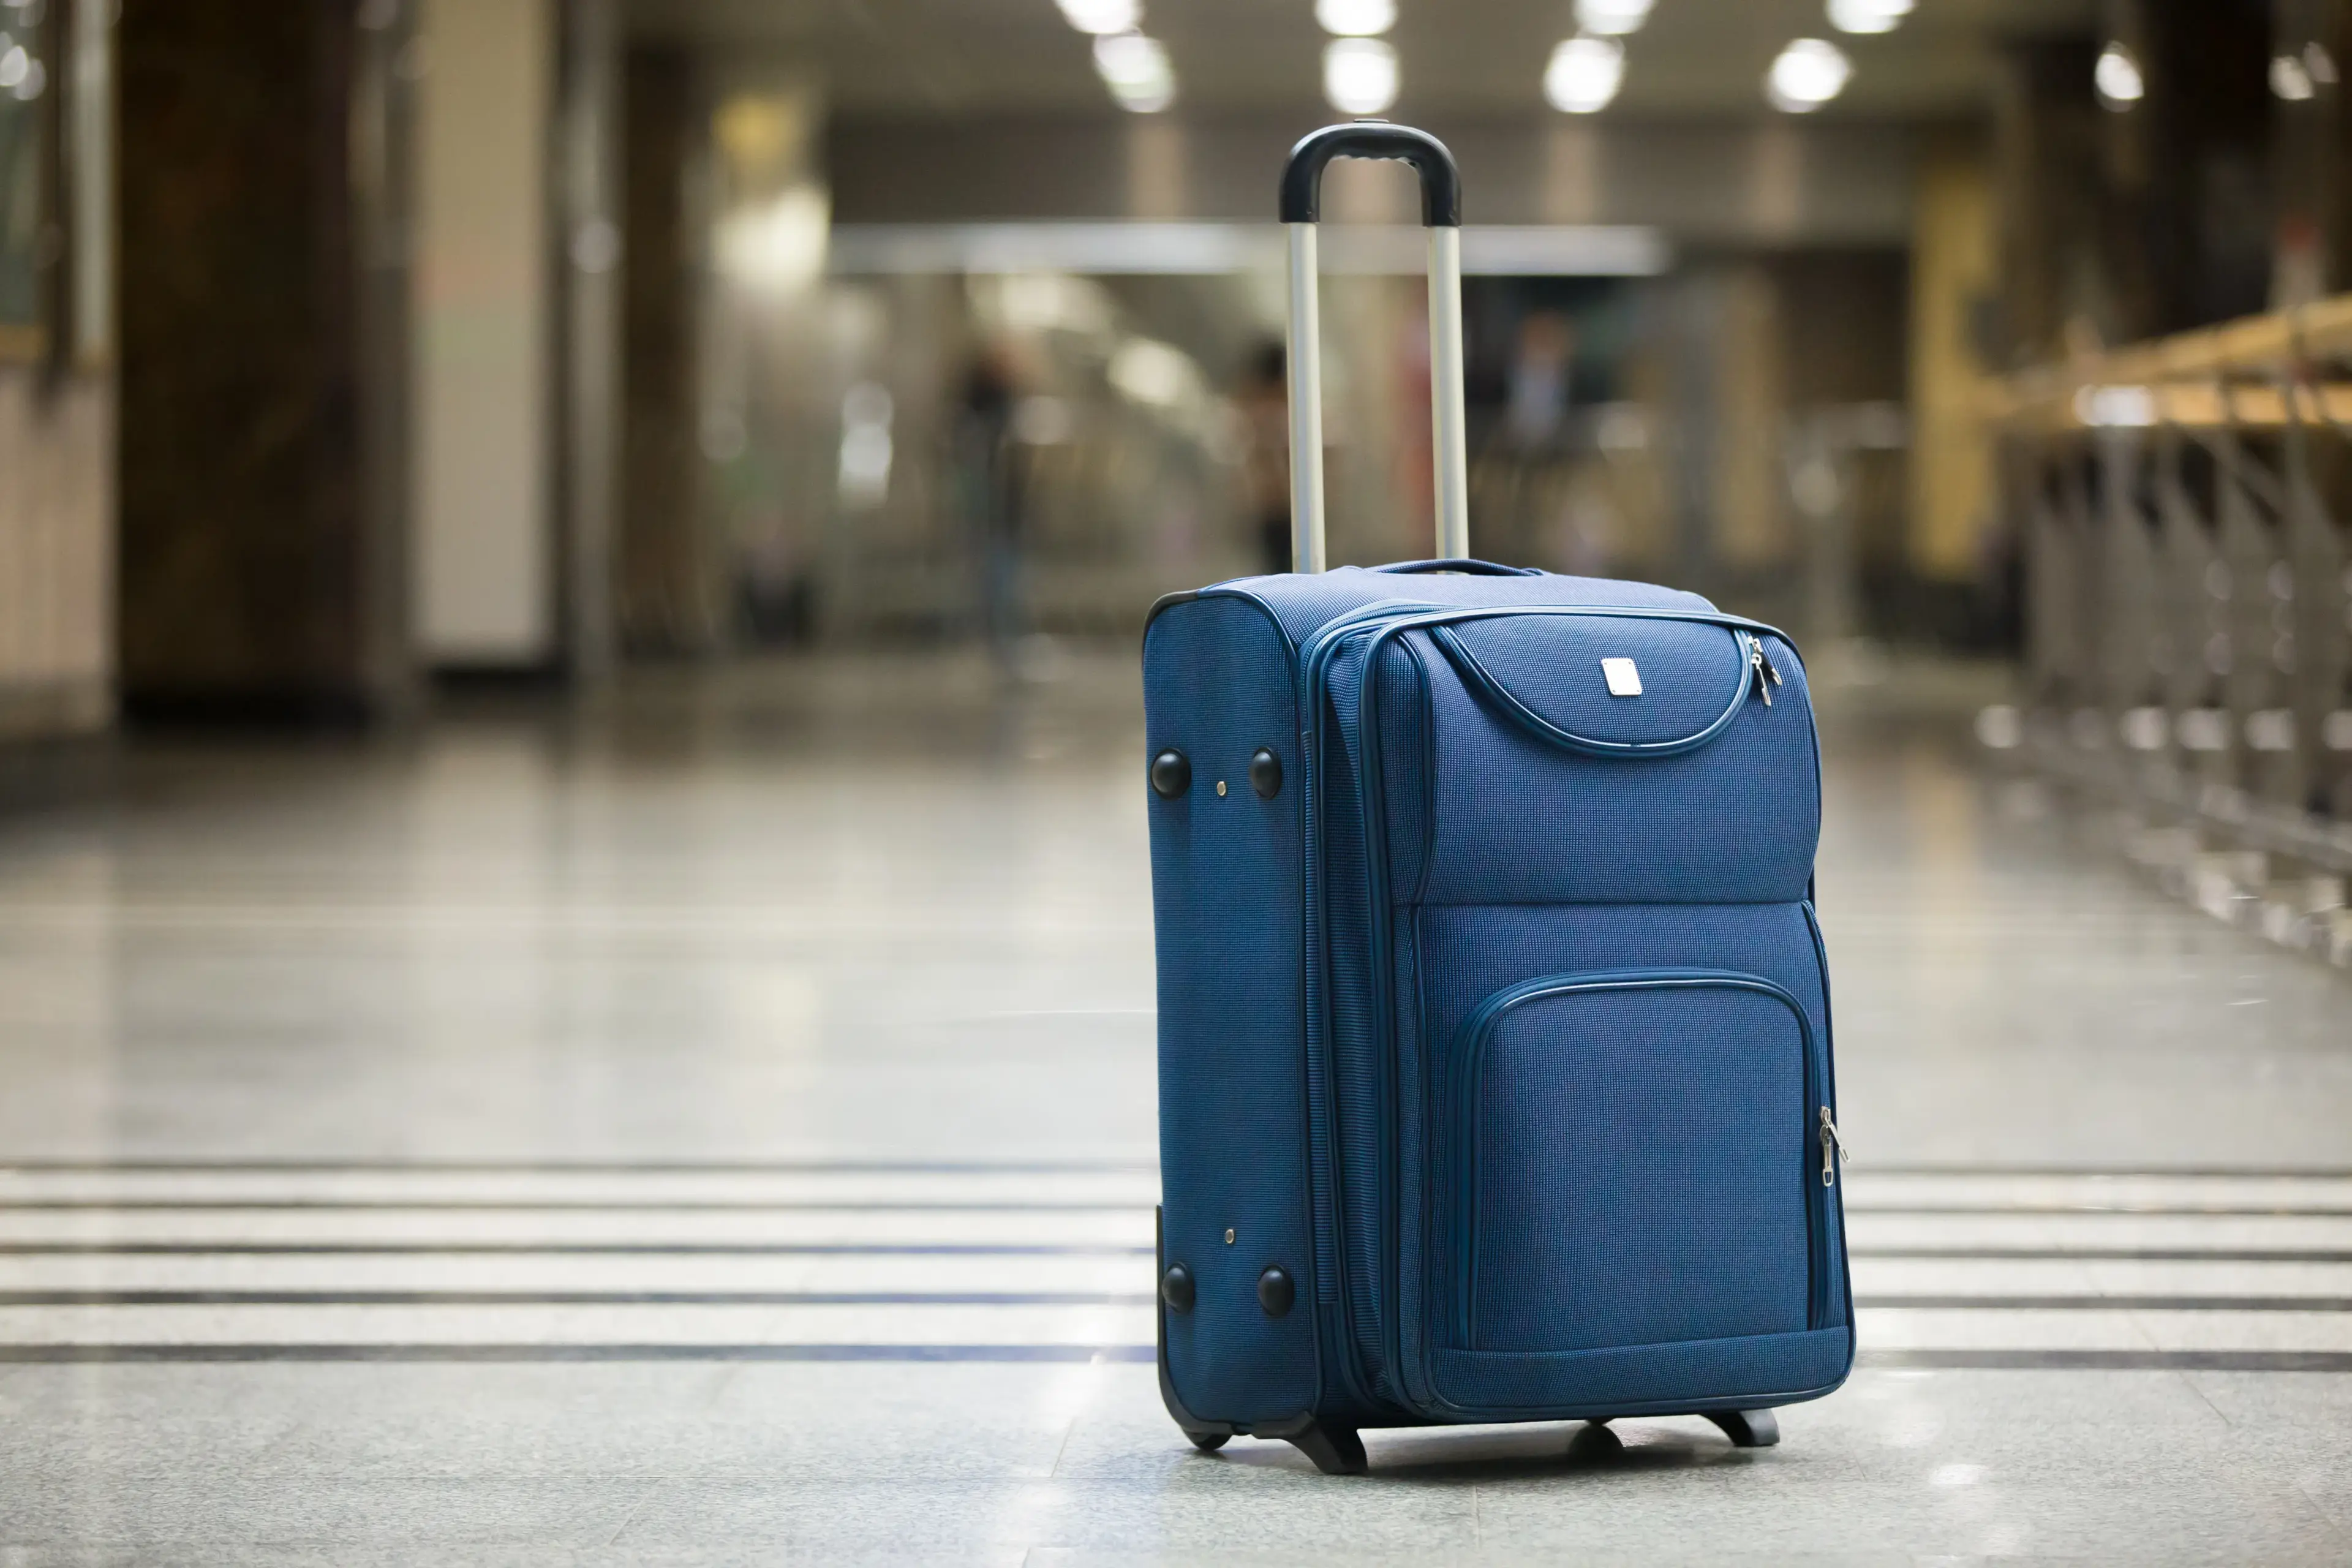 Luggage Restrictions: JetBlue